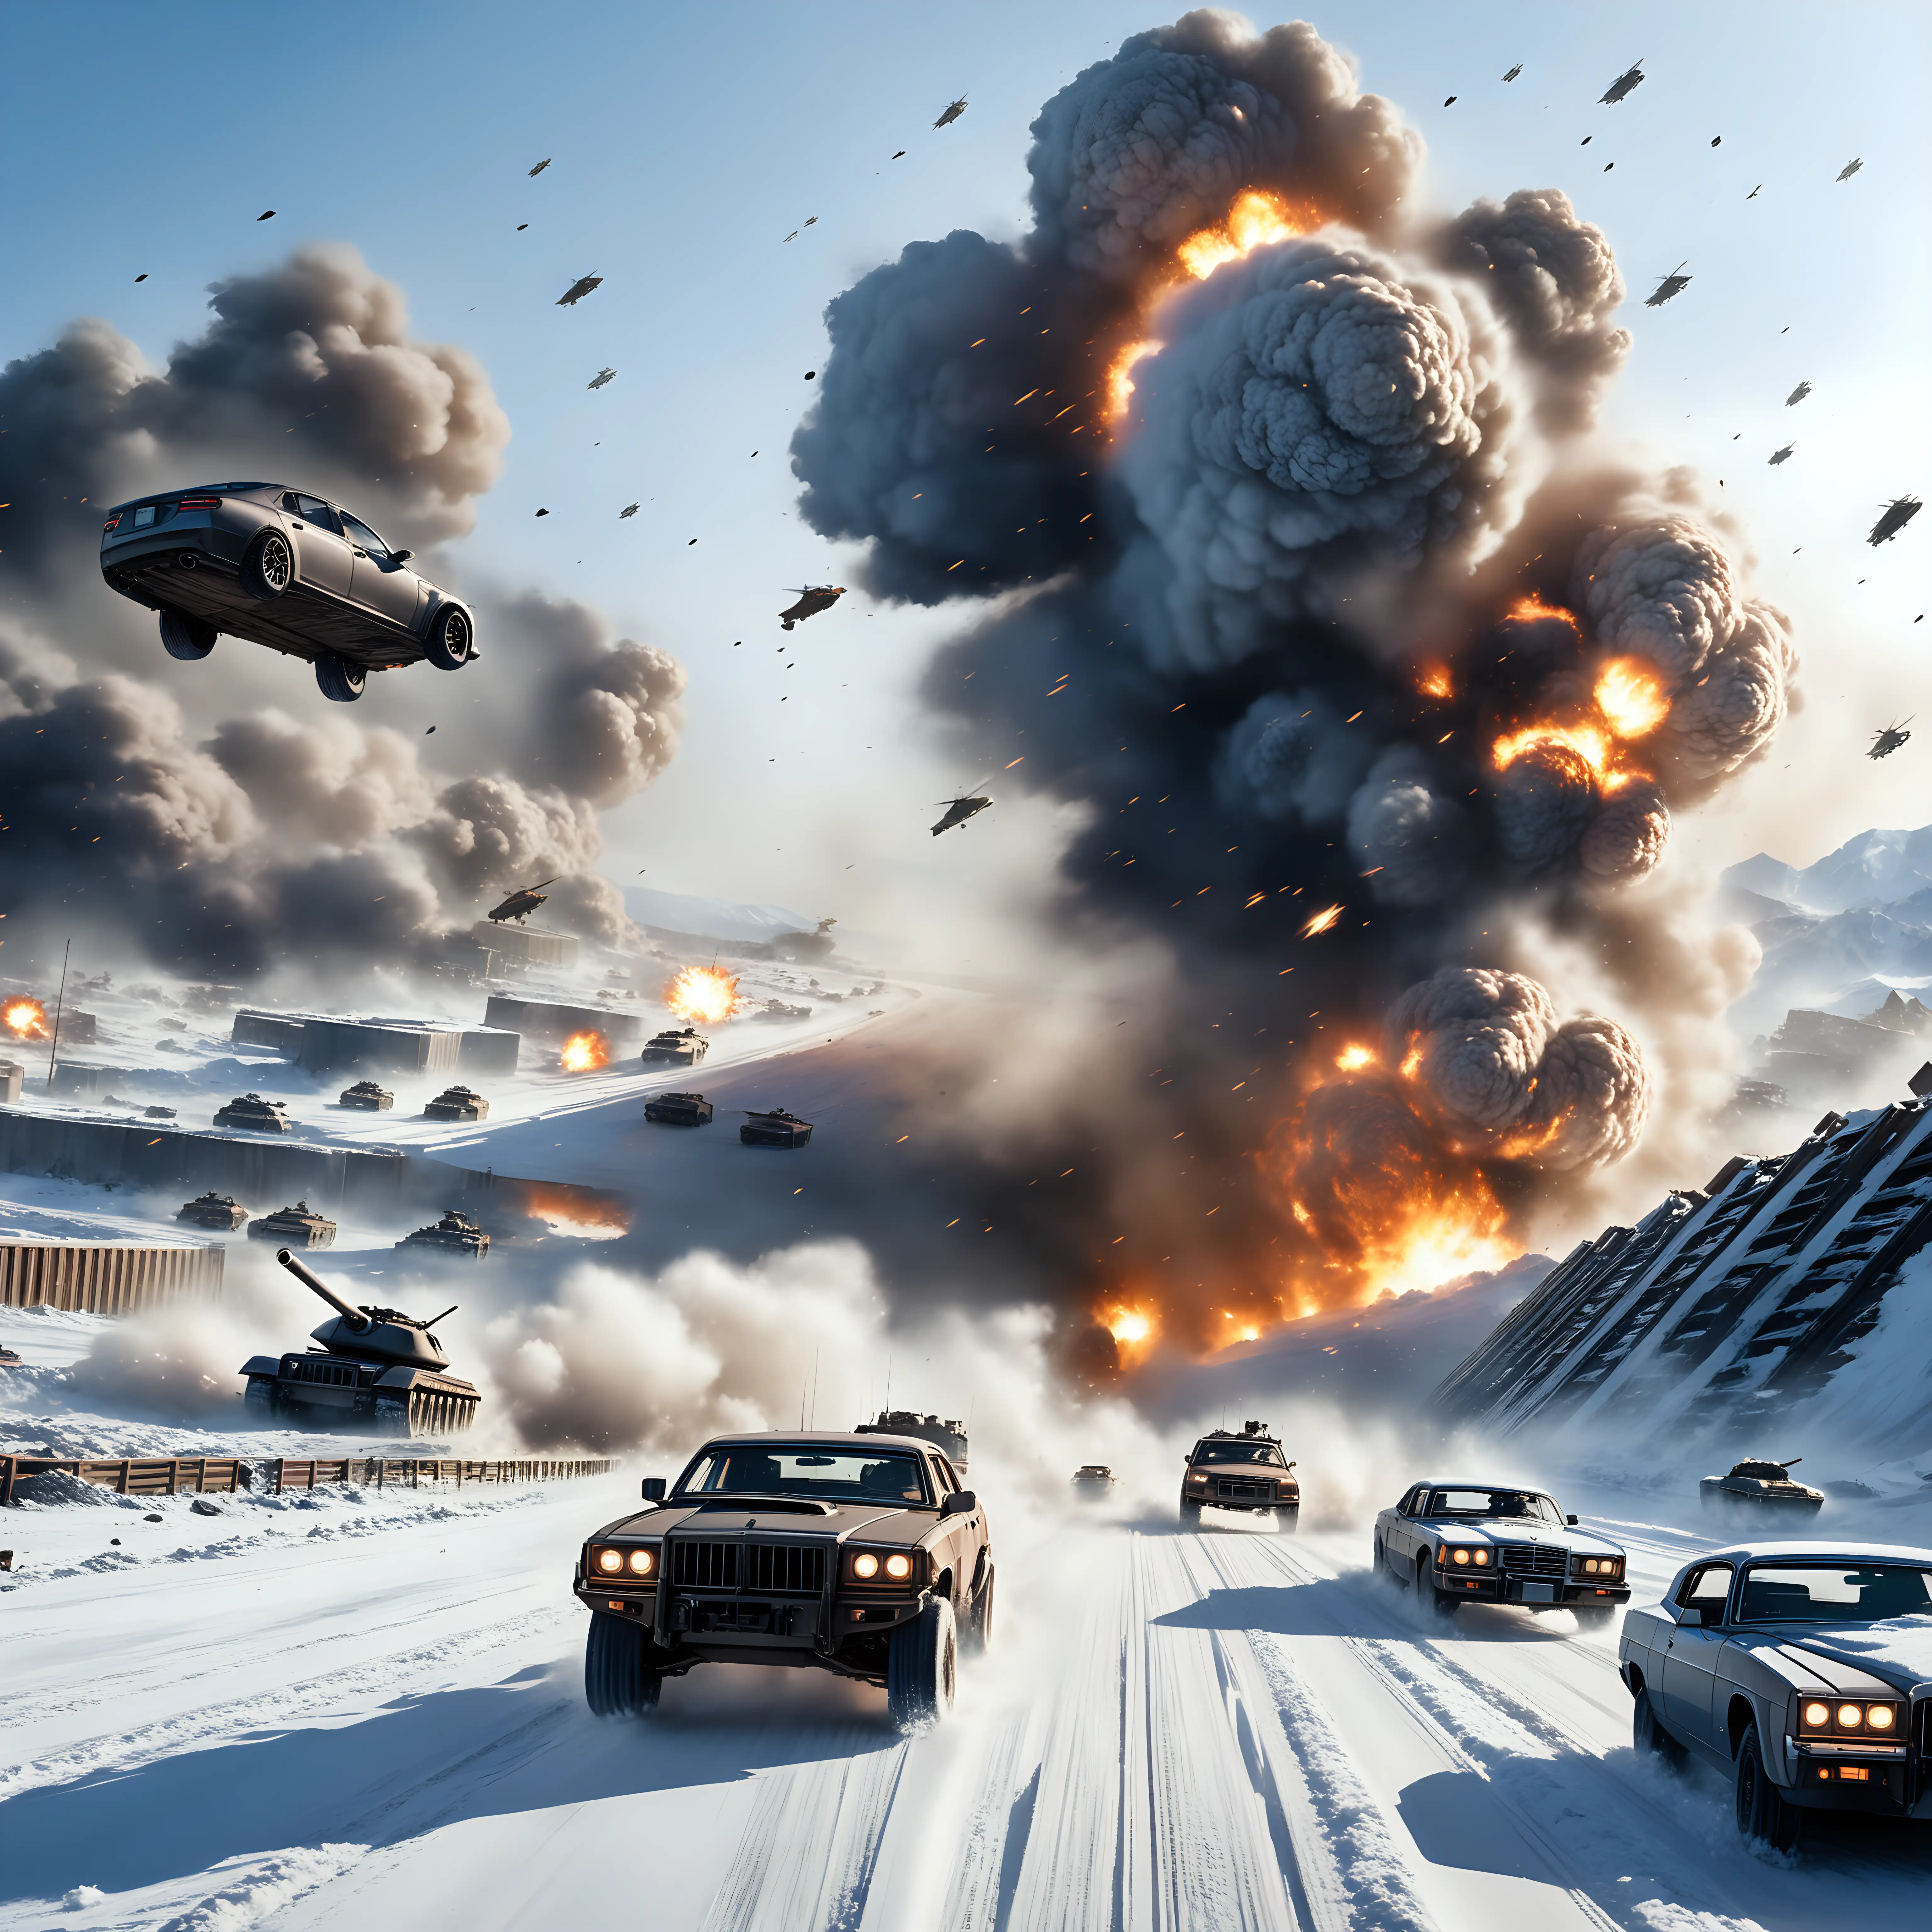 This image appears to be a scene from an action movie, featuring an intense car chase or escape sequence in a snowy or icy environment. The vehicles in the foreground, which include a mix of modified cars and a tank-like vehicle, are speeding away from a massive explosion or a collapsing structure in the background. The scene is highly dramatic, with debris and vehicles being hurled into the air, emphasizing the chaos and high stakes of the moment. The snowy setting adds to the intensity, suggesting that the characters are facing extreme conditions. This type of imagery is typical of high-octane action films, particularly those involving elaborate stunts and special effects.

